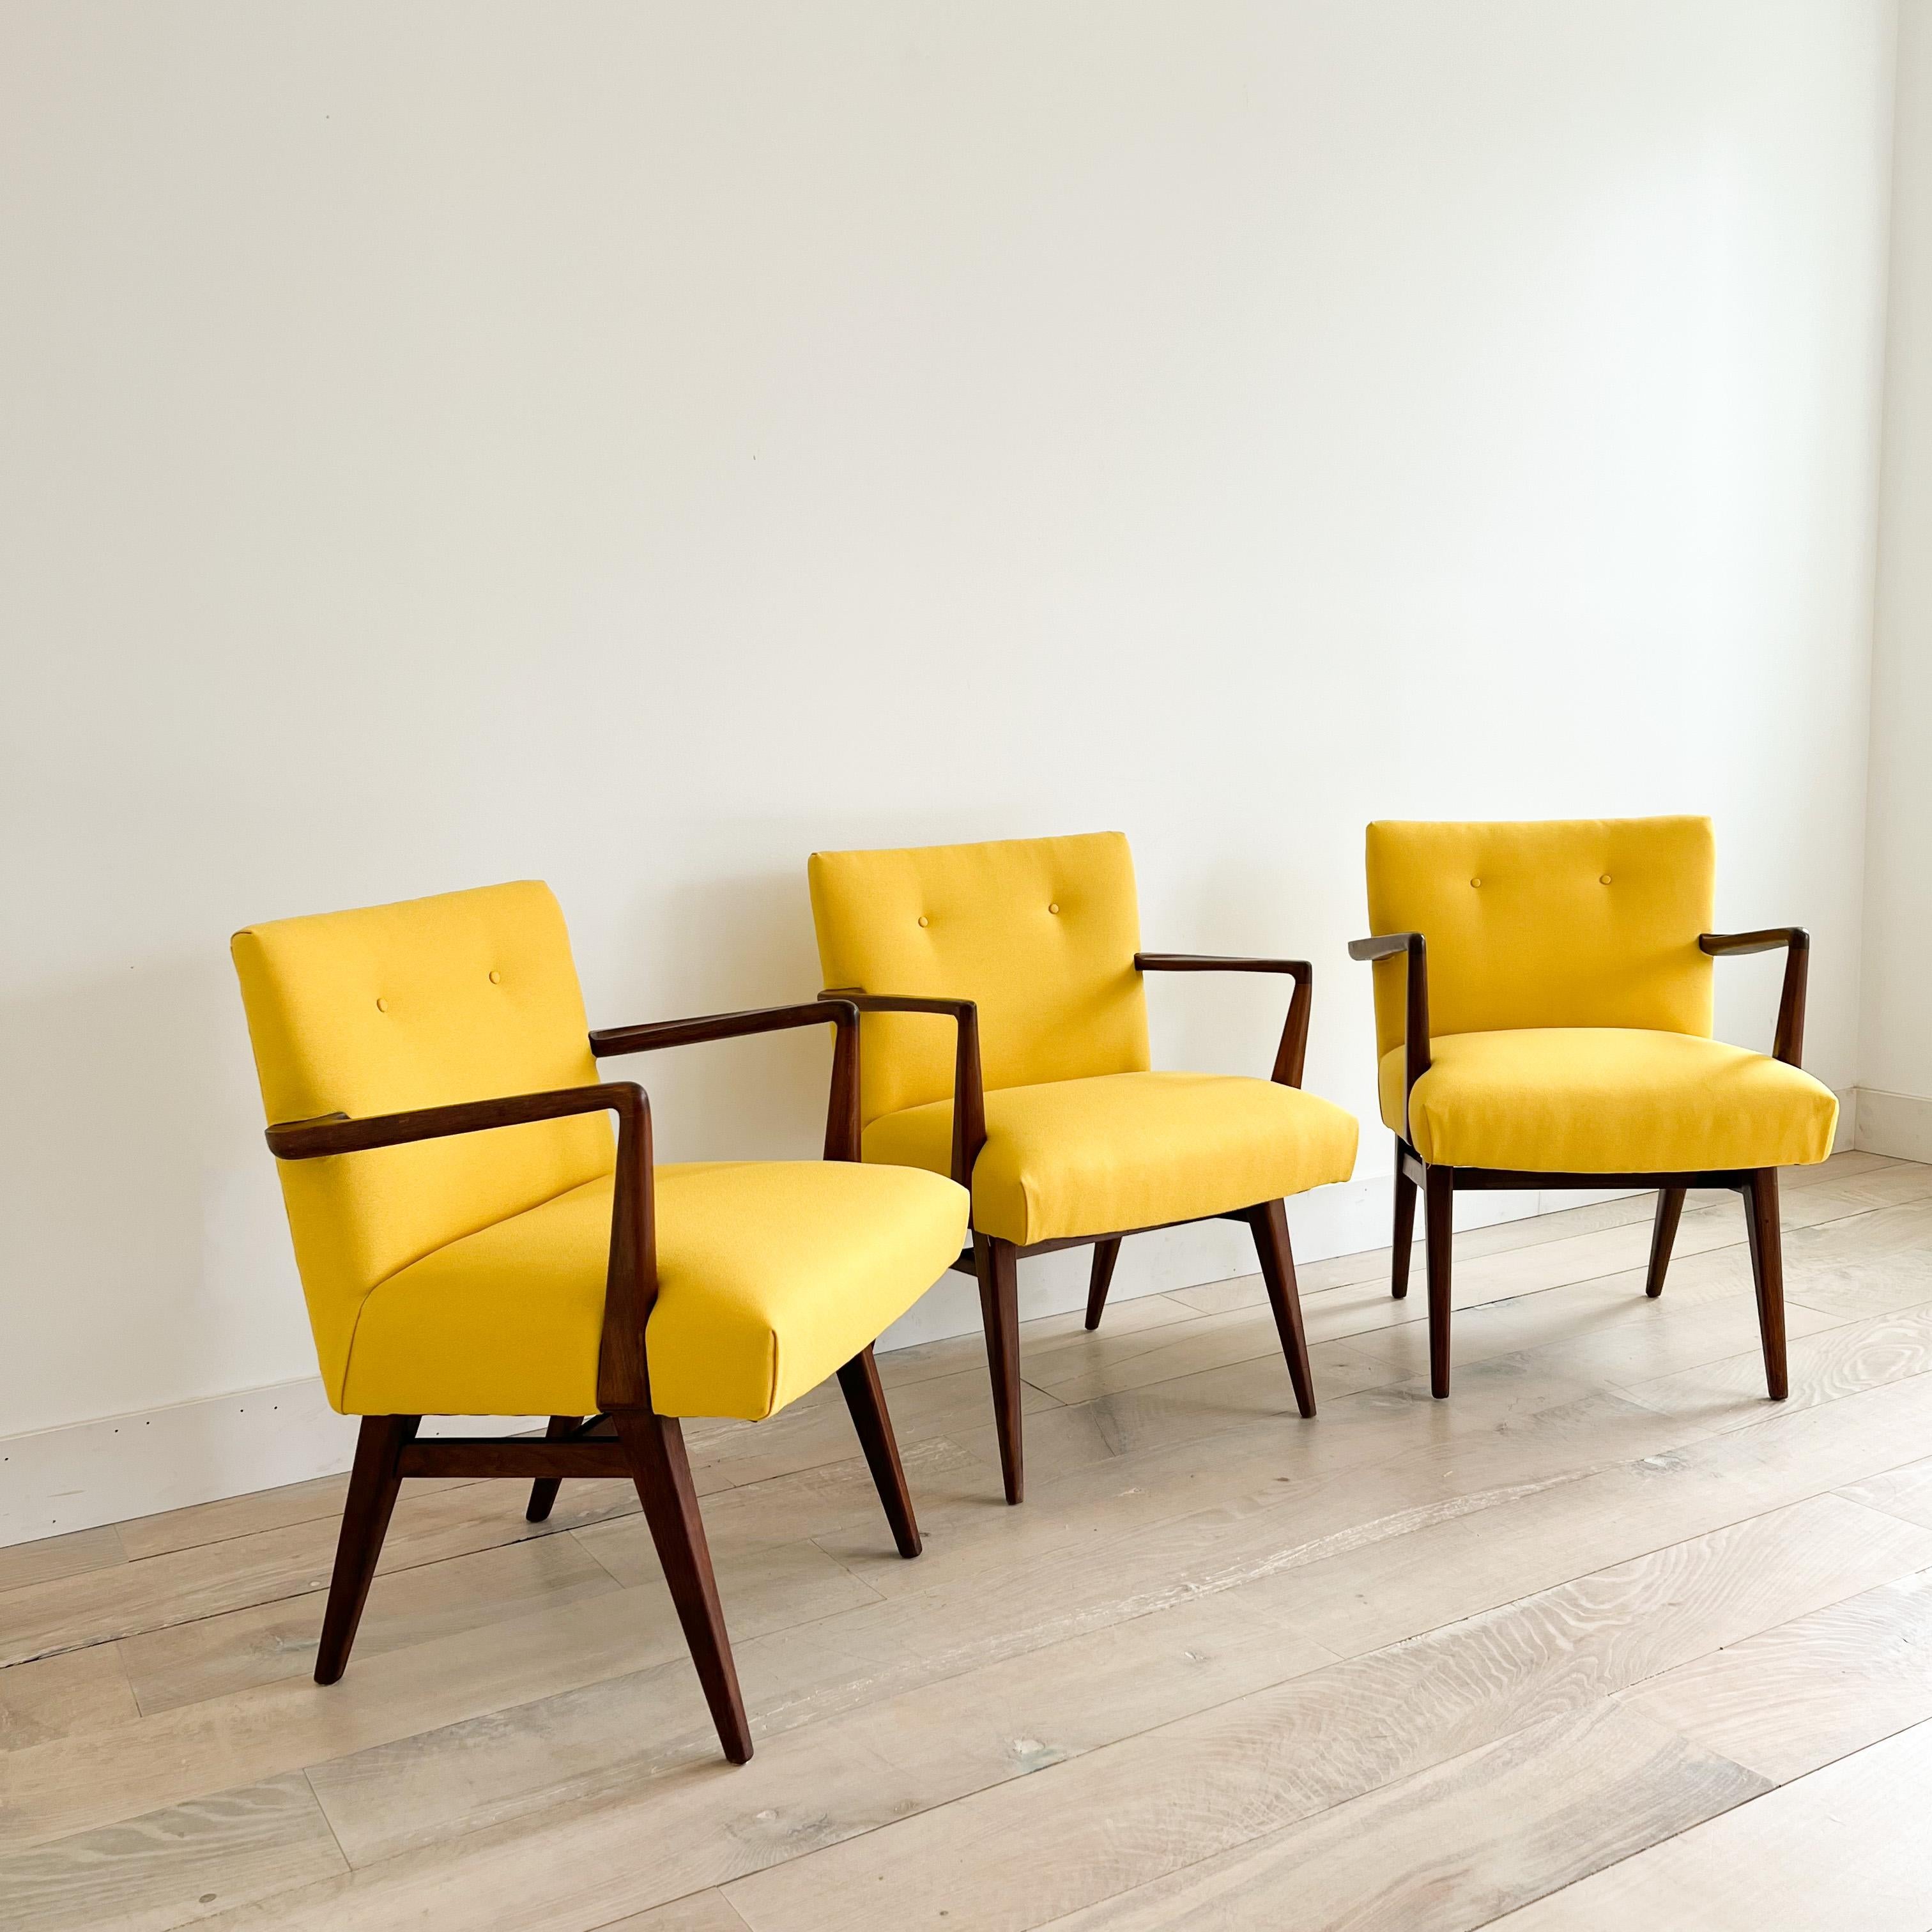 We have 3 of these Mid-Century Modern Jens Risom armchairs in stock. New yellow upholstery. Some scuffing/scratching/fading to the walnut bases from age appropriate wear.
 